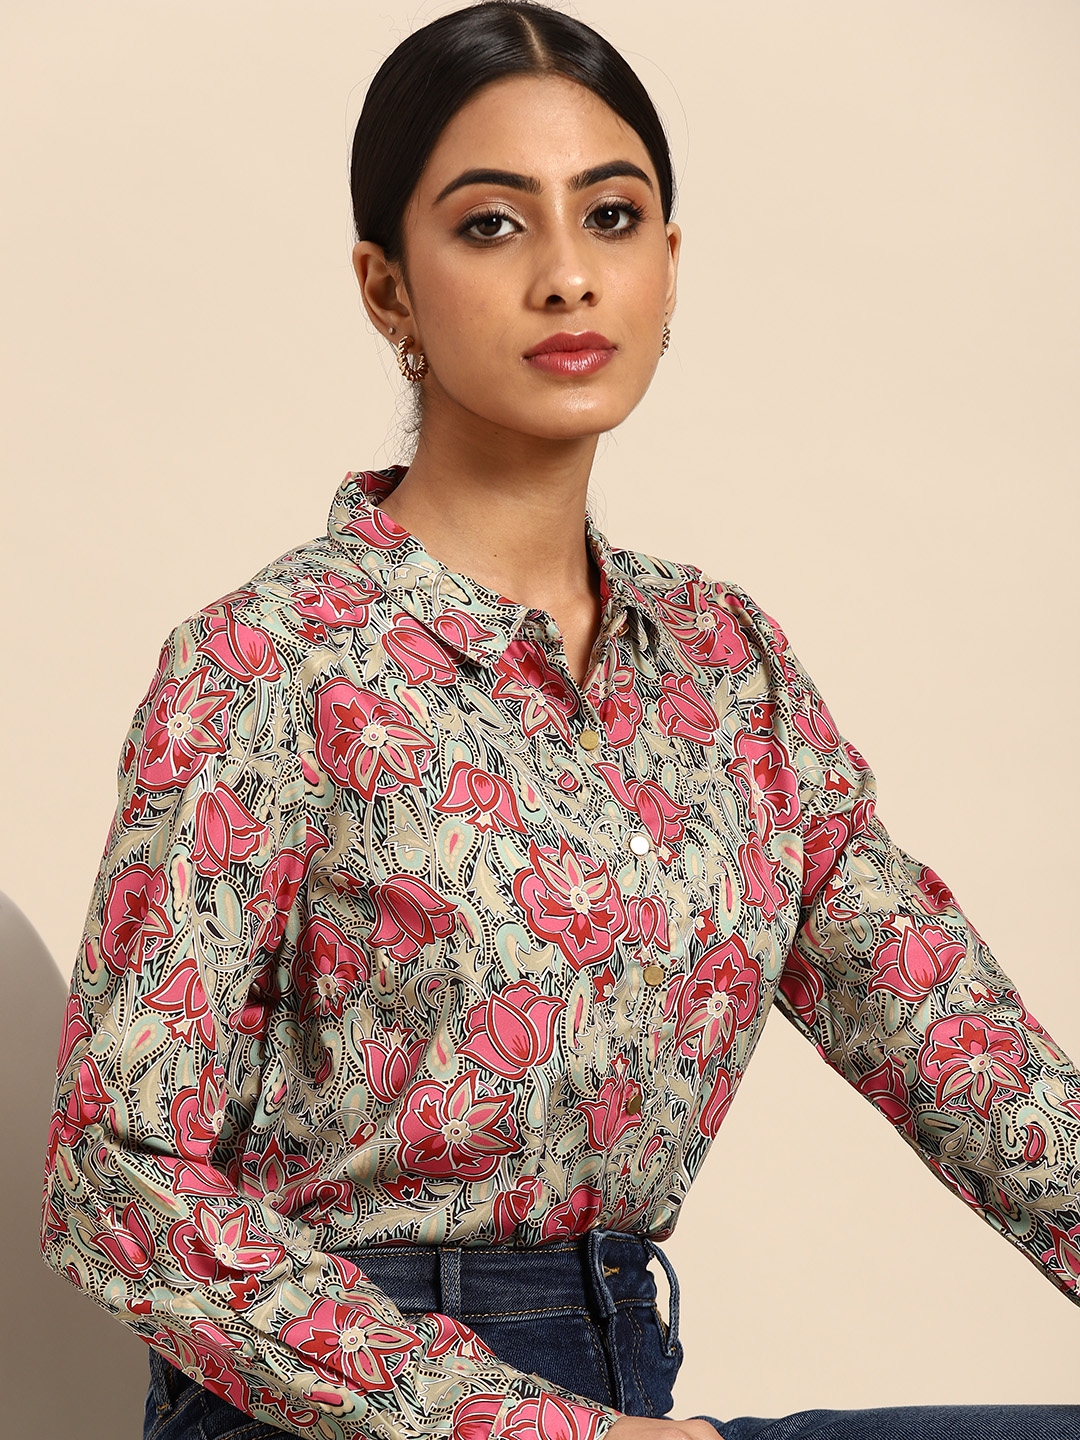 Myntra - Embrace your casual side with these floral tops